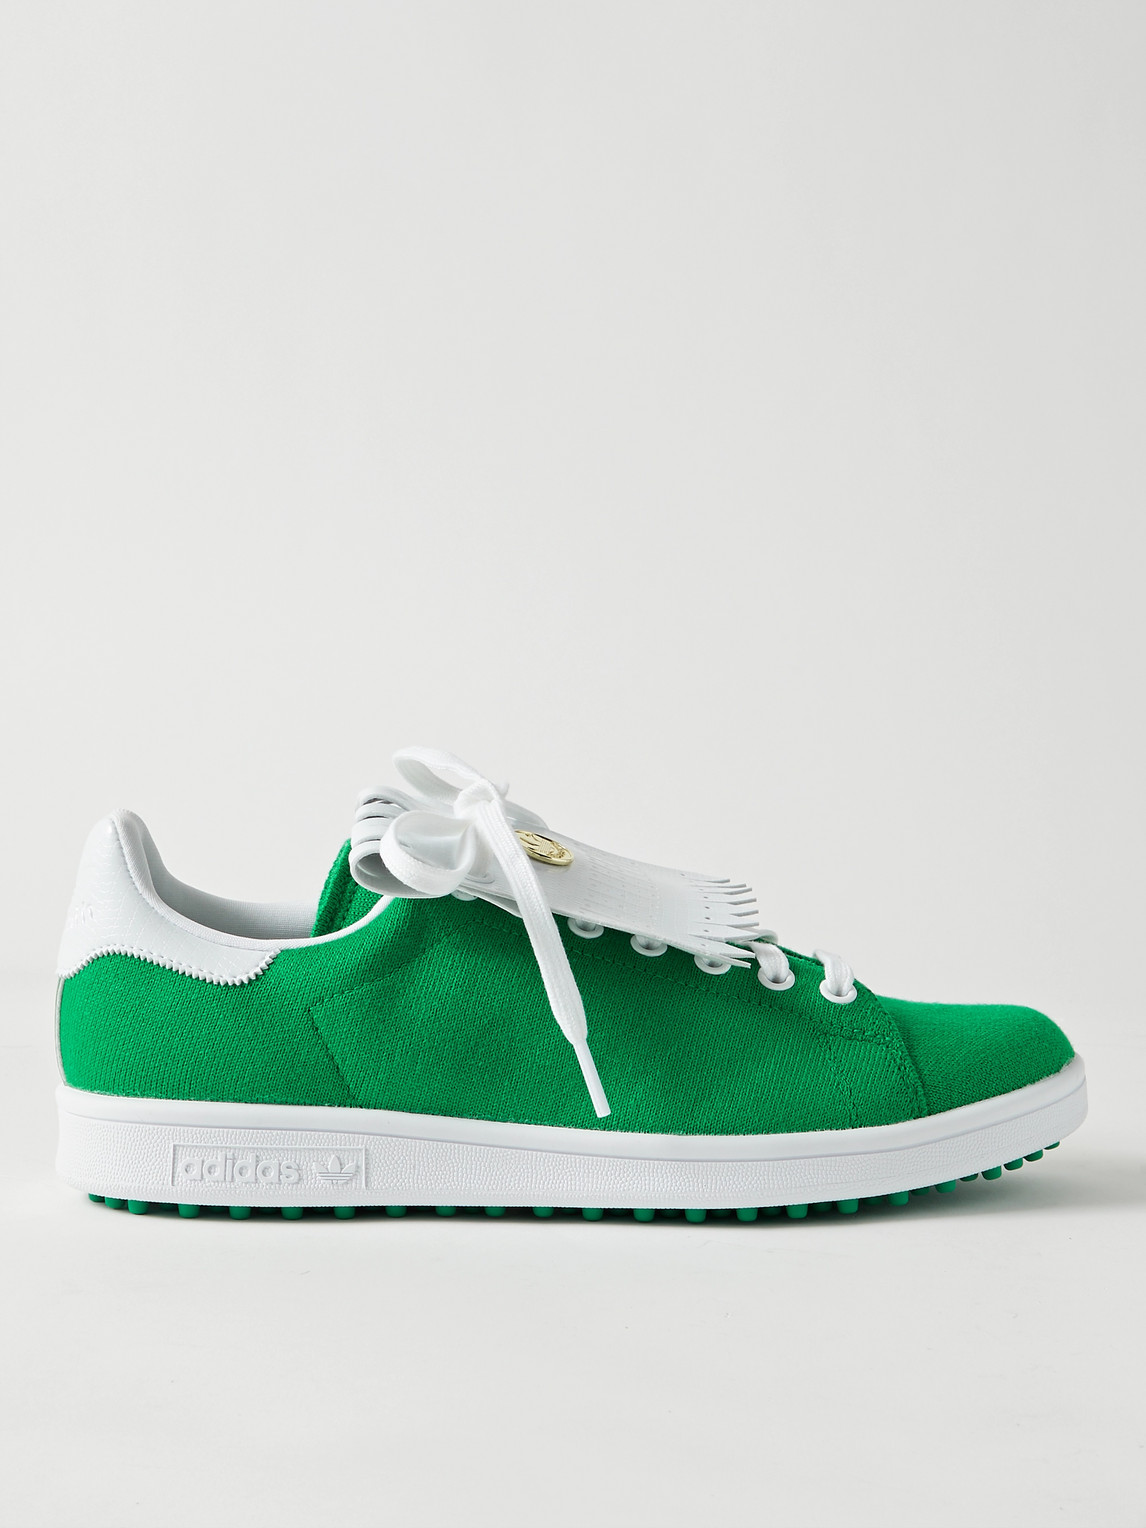 Adidas Golf Stan Smith Limited Edition Primegreen And Faux Leather Spikeless Golf Shoes In Green